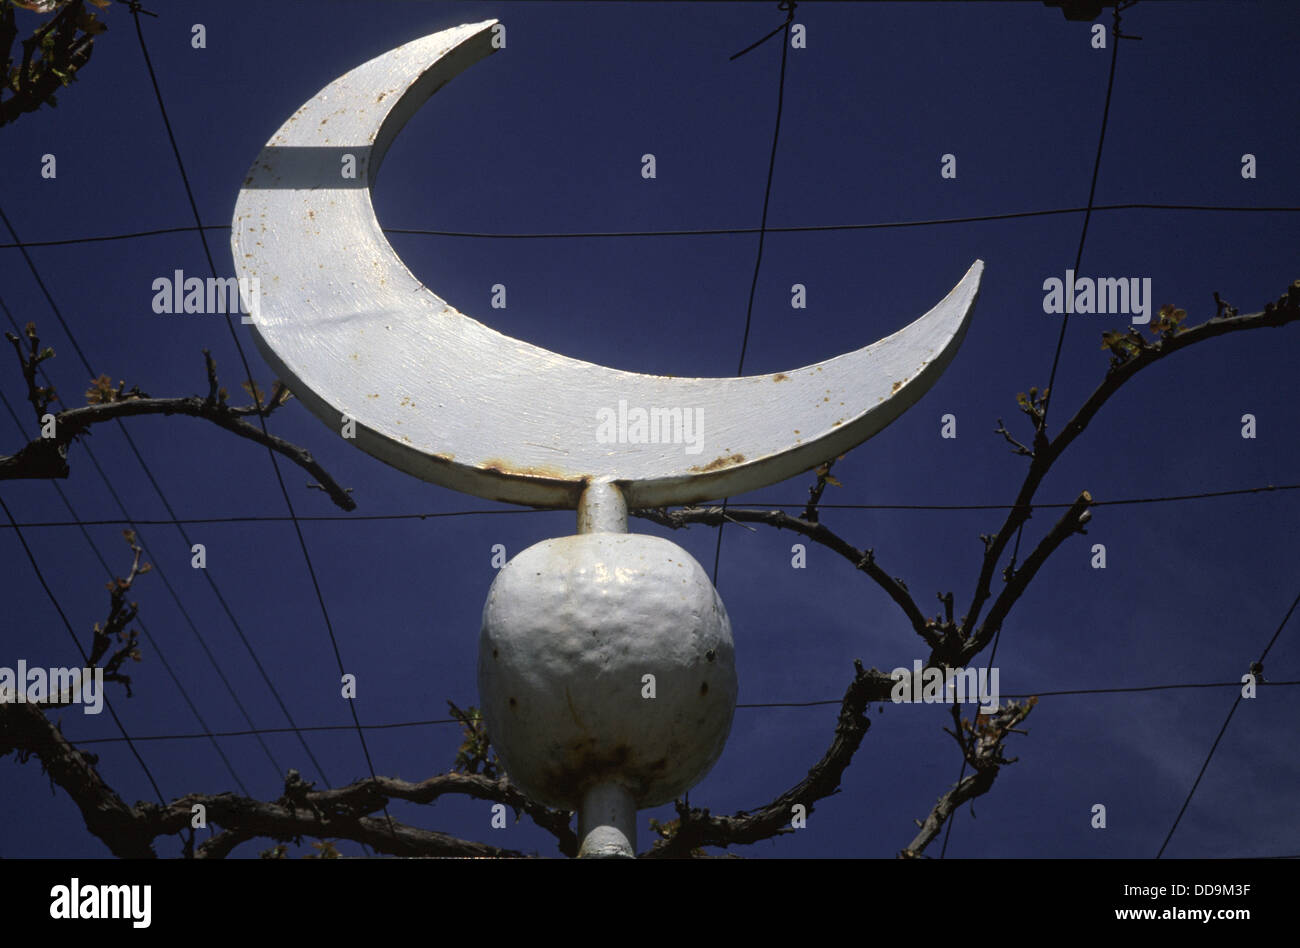 Crescent moon decorating a mosque finial in an Arab village Northern Galilee Israel Stock Photo